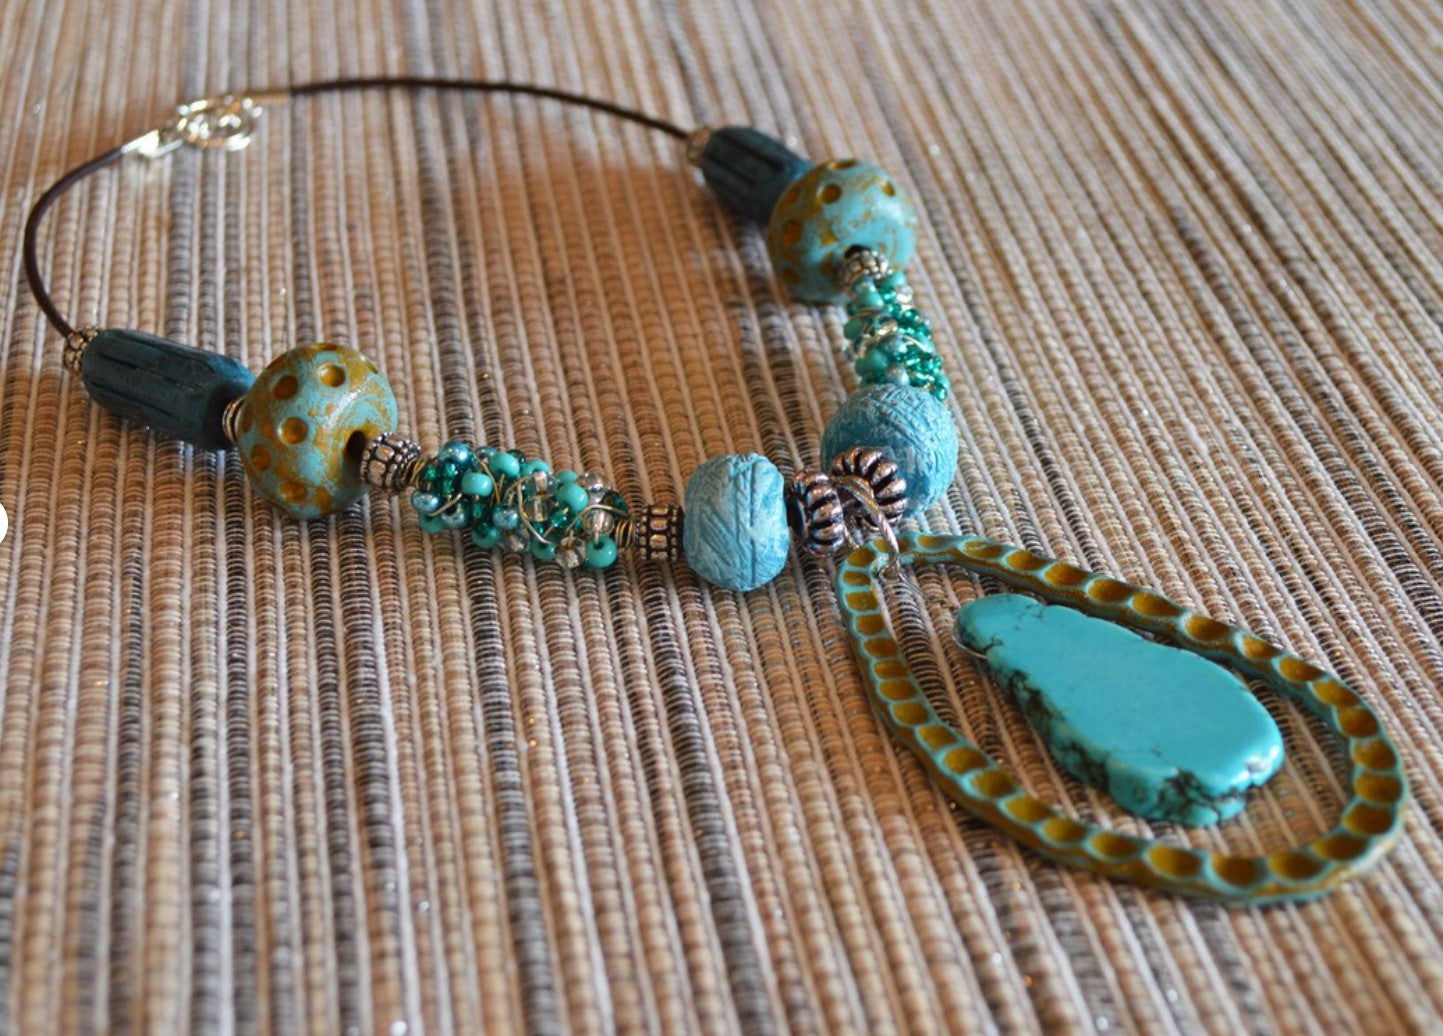 One of a kind statement beads polymer clay pendant necklace / earthy turquoise blues